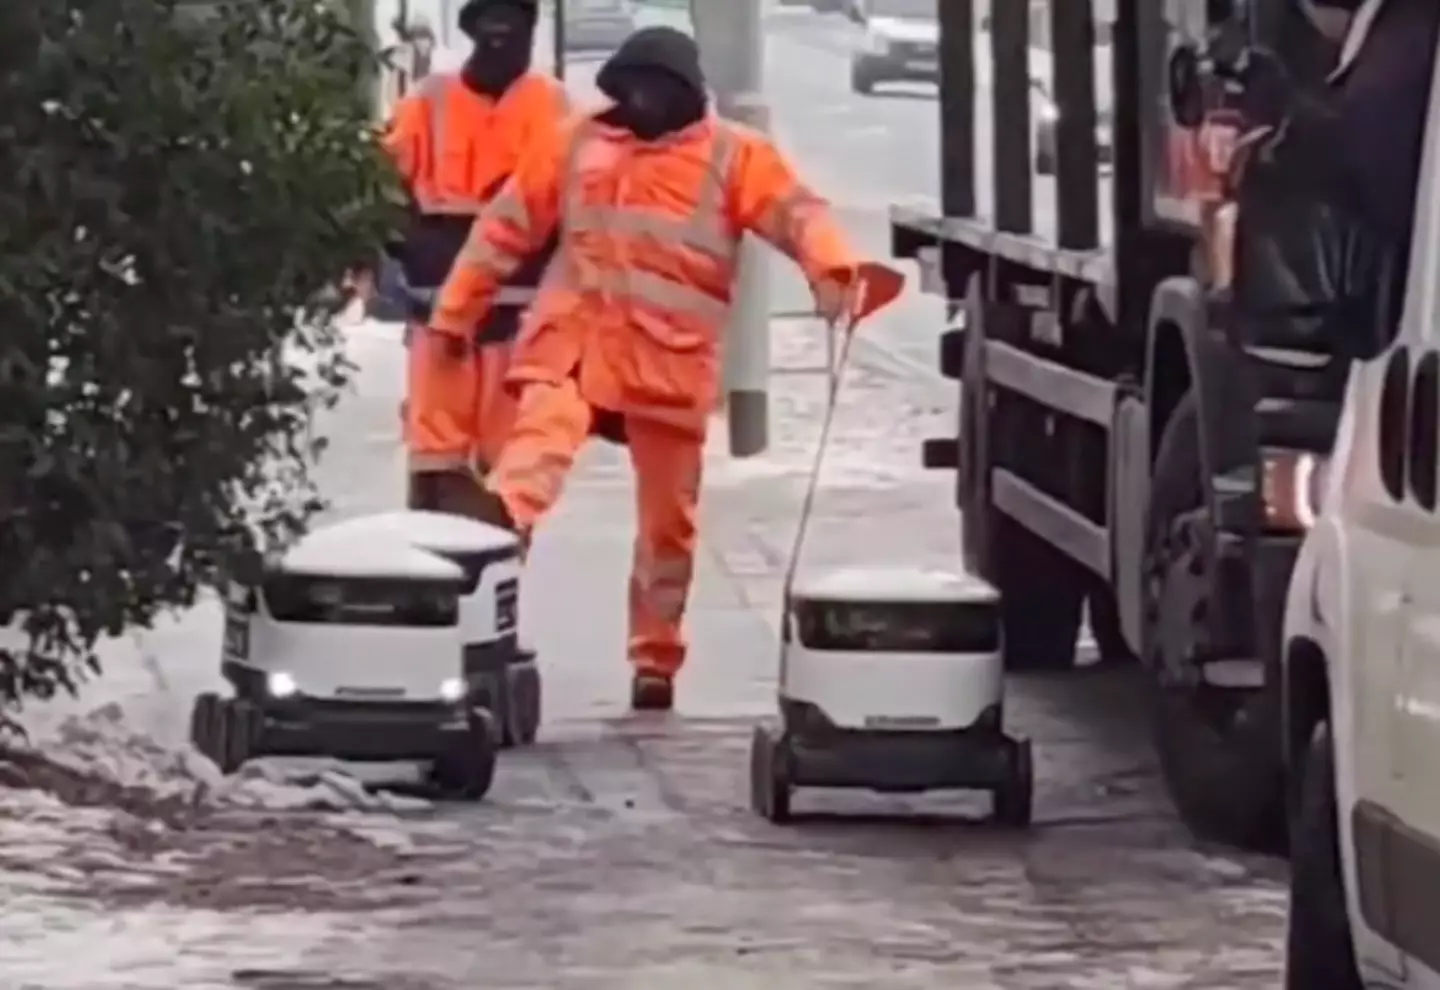 Social media users are outraged by a video of a man kicking a delivery robot.